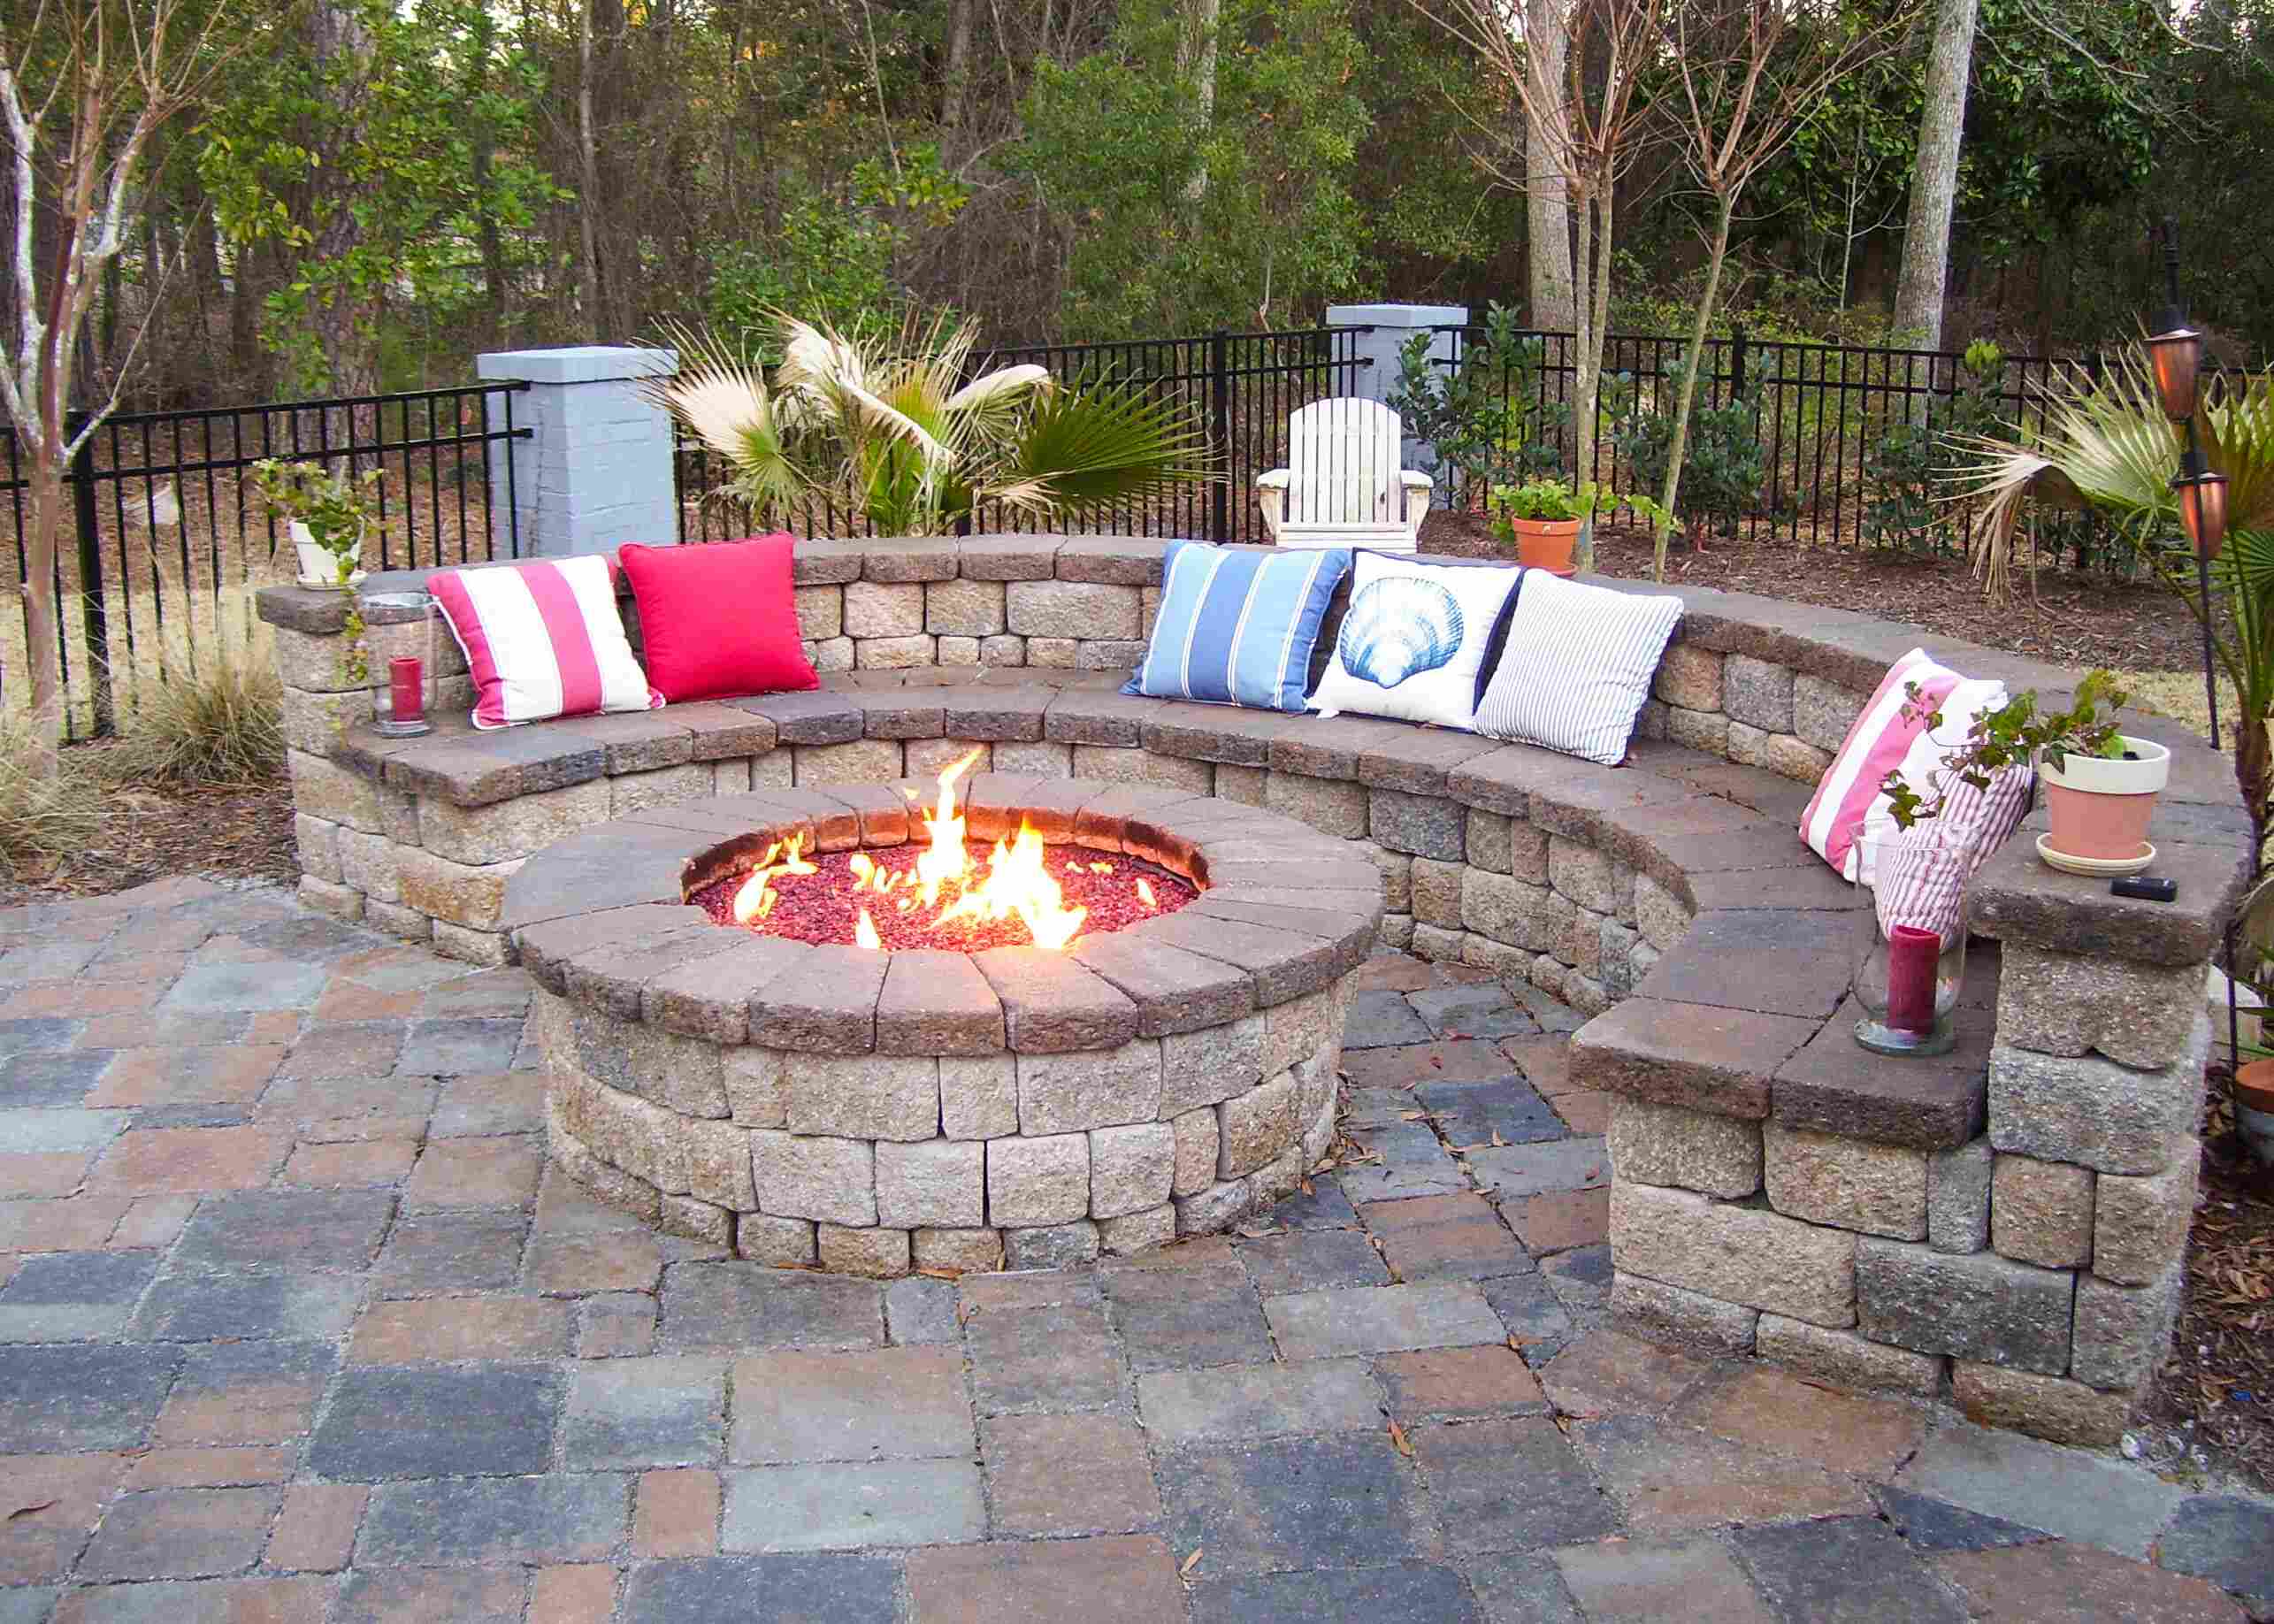 How To Build A Firepit In Your Backyard